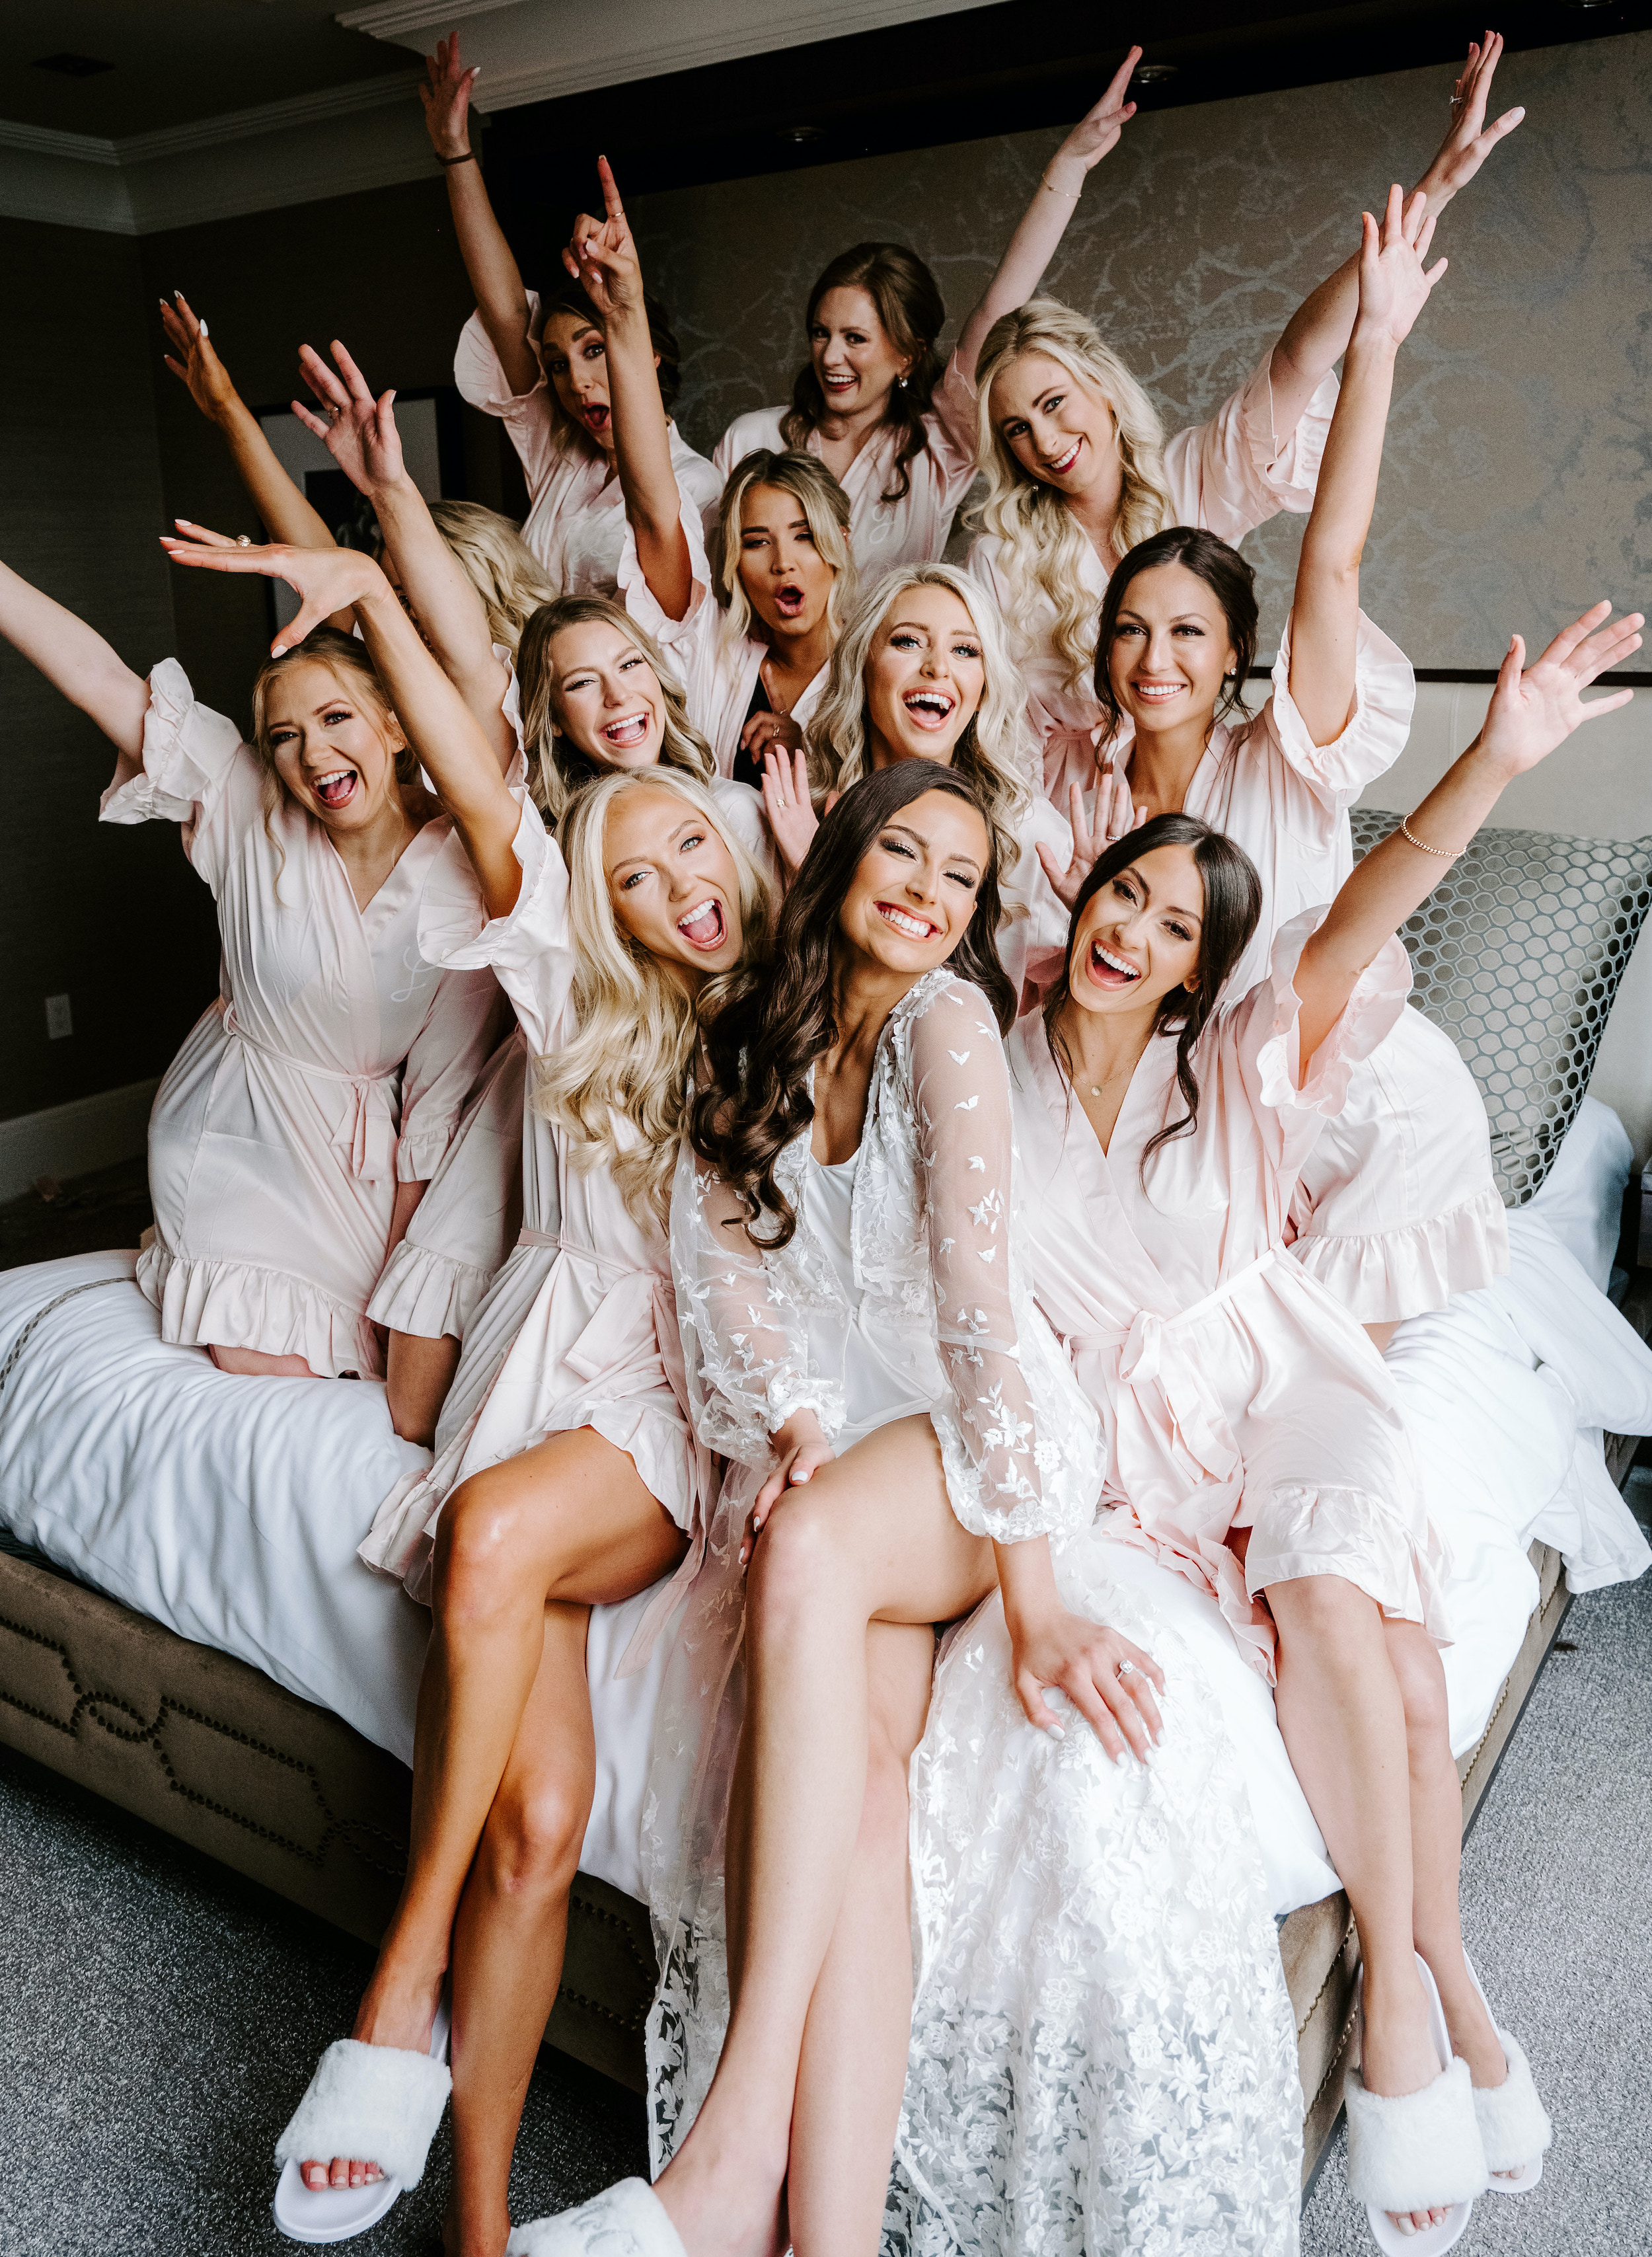 The bride is smiling with all her bridesmaids before the elegant rainy wedding.